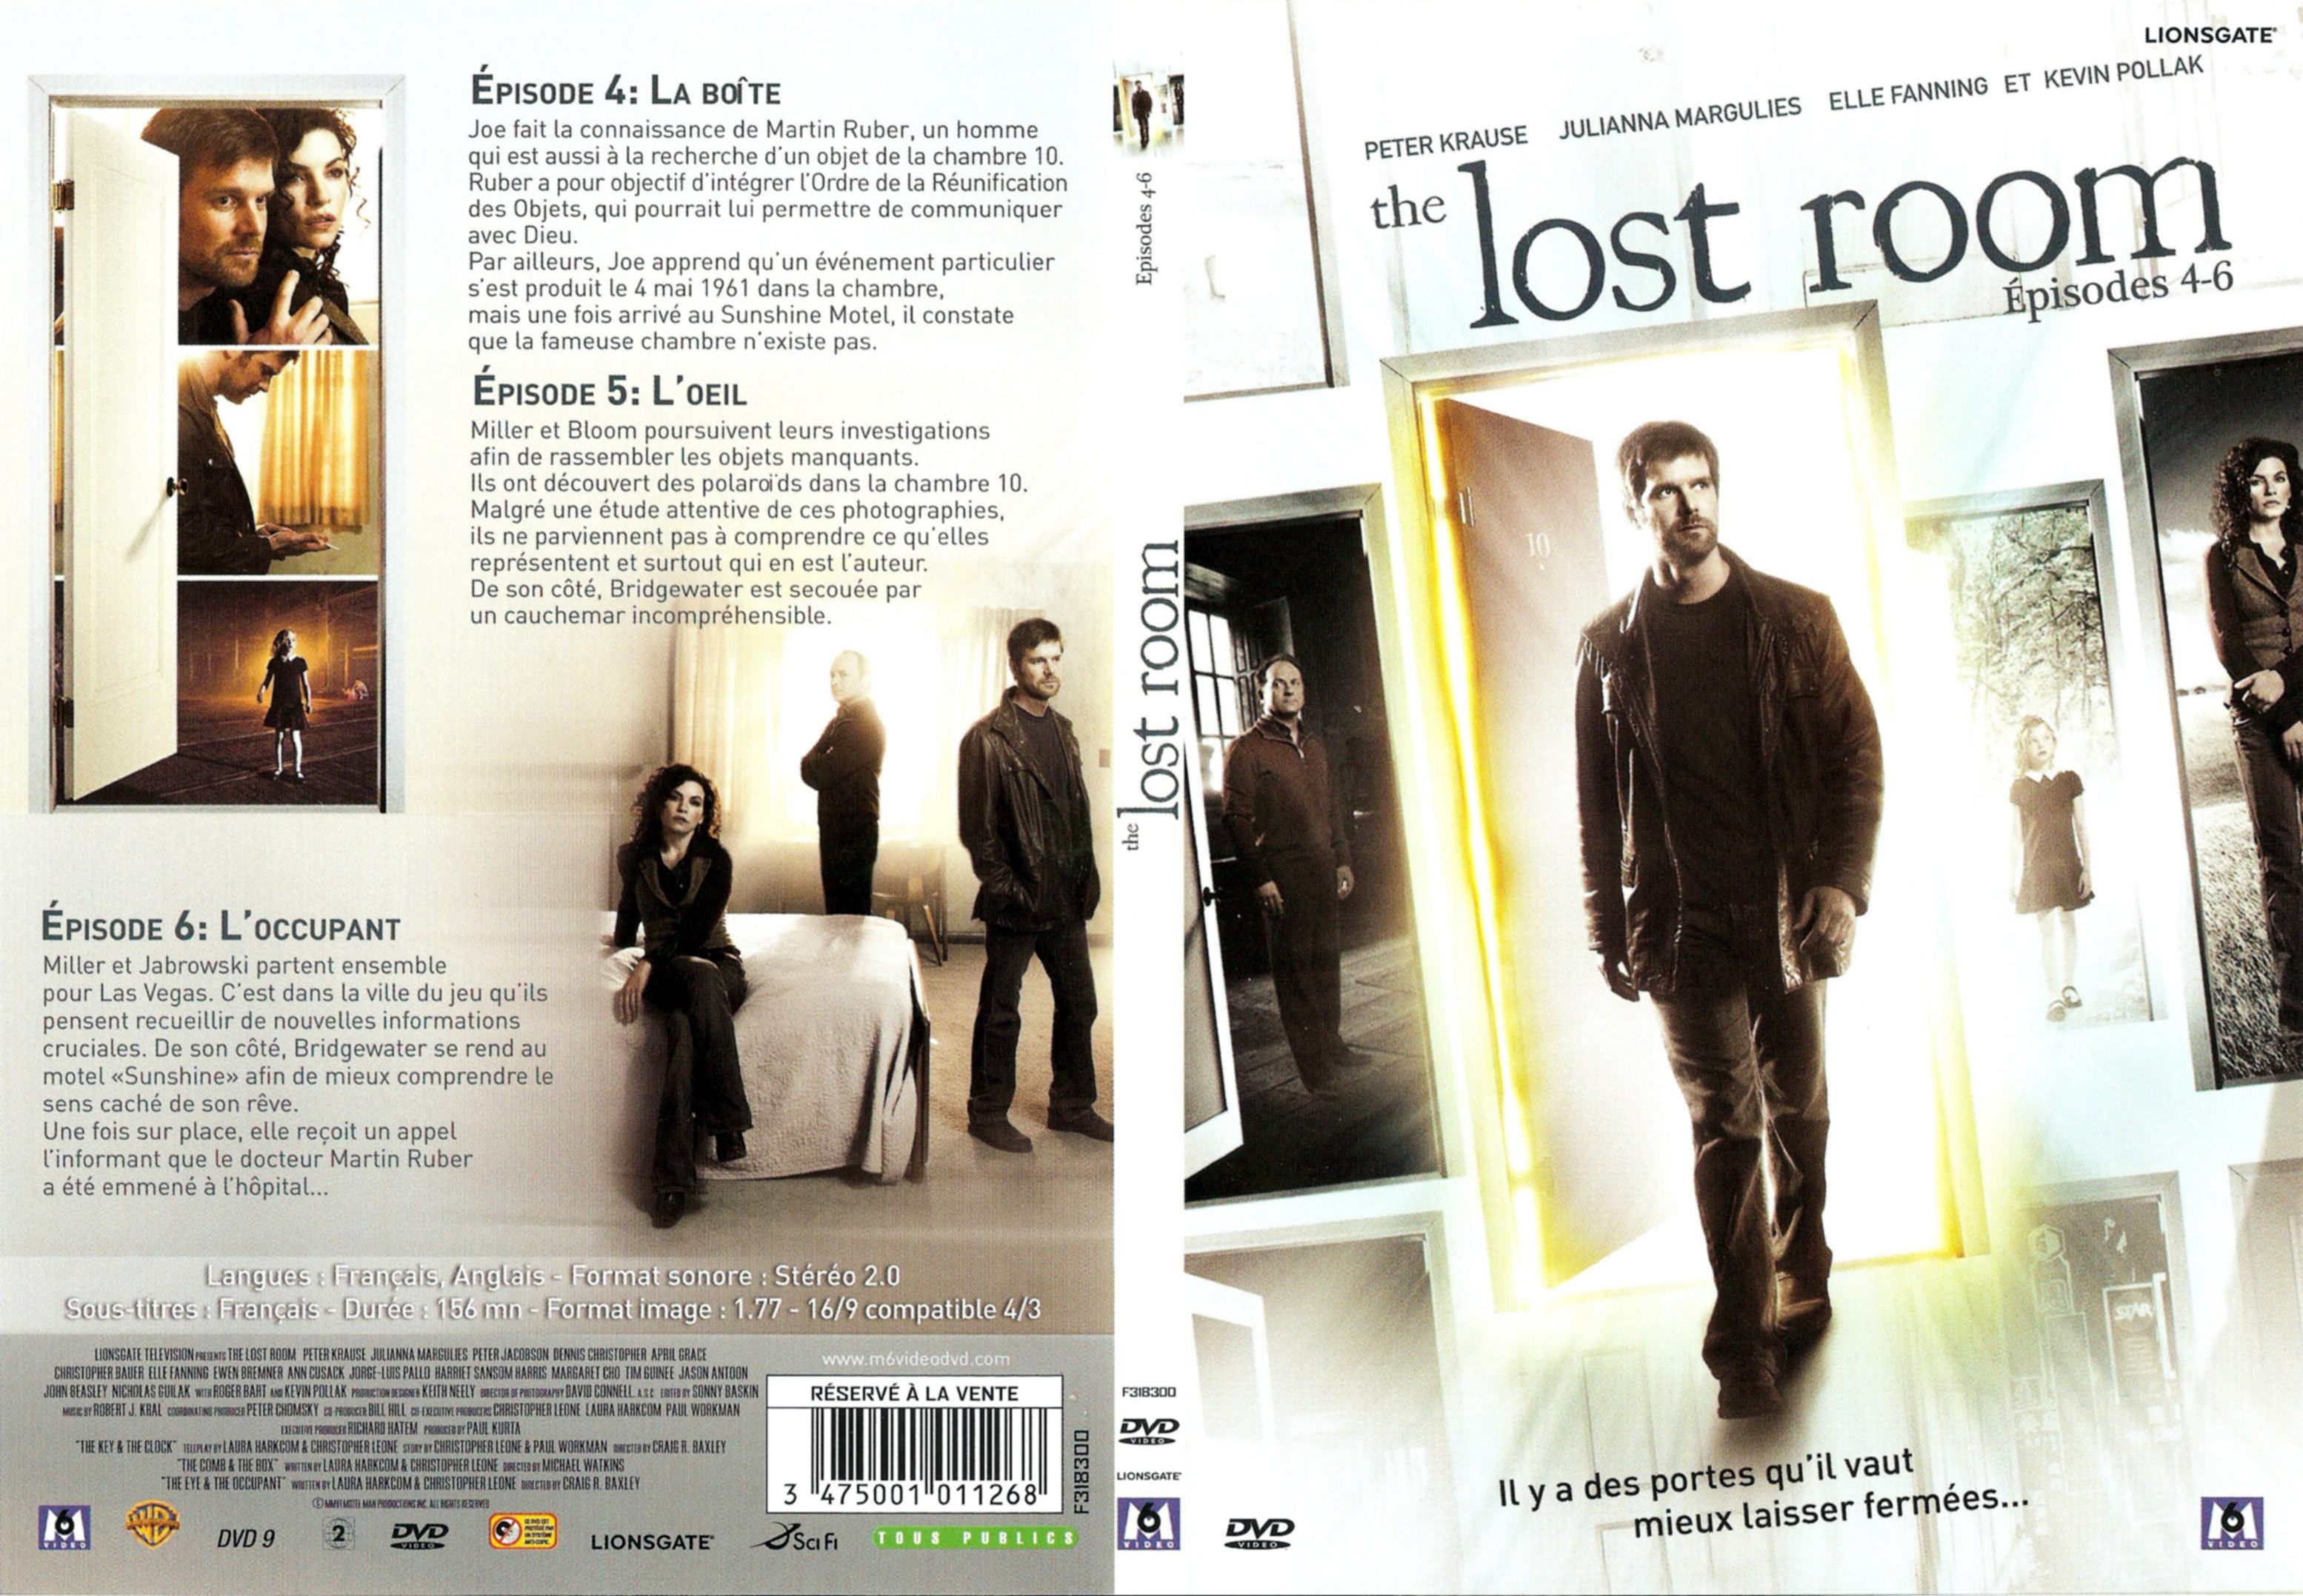 Jaquette DVD The lost room DVD 2